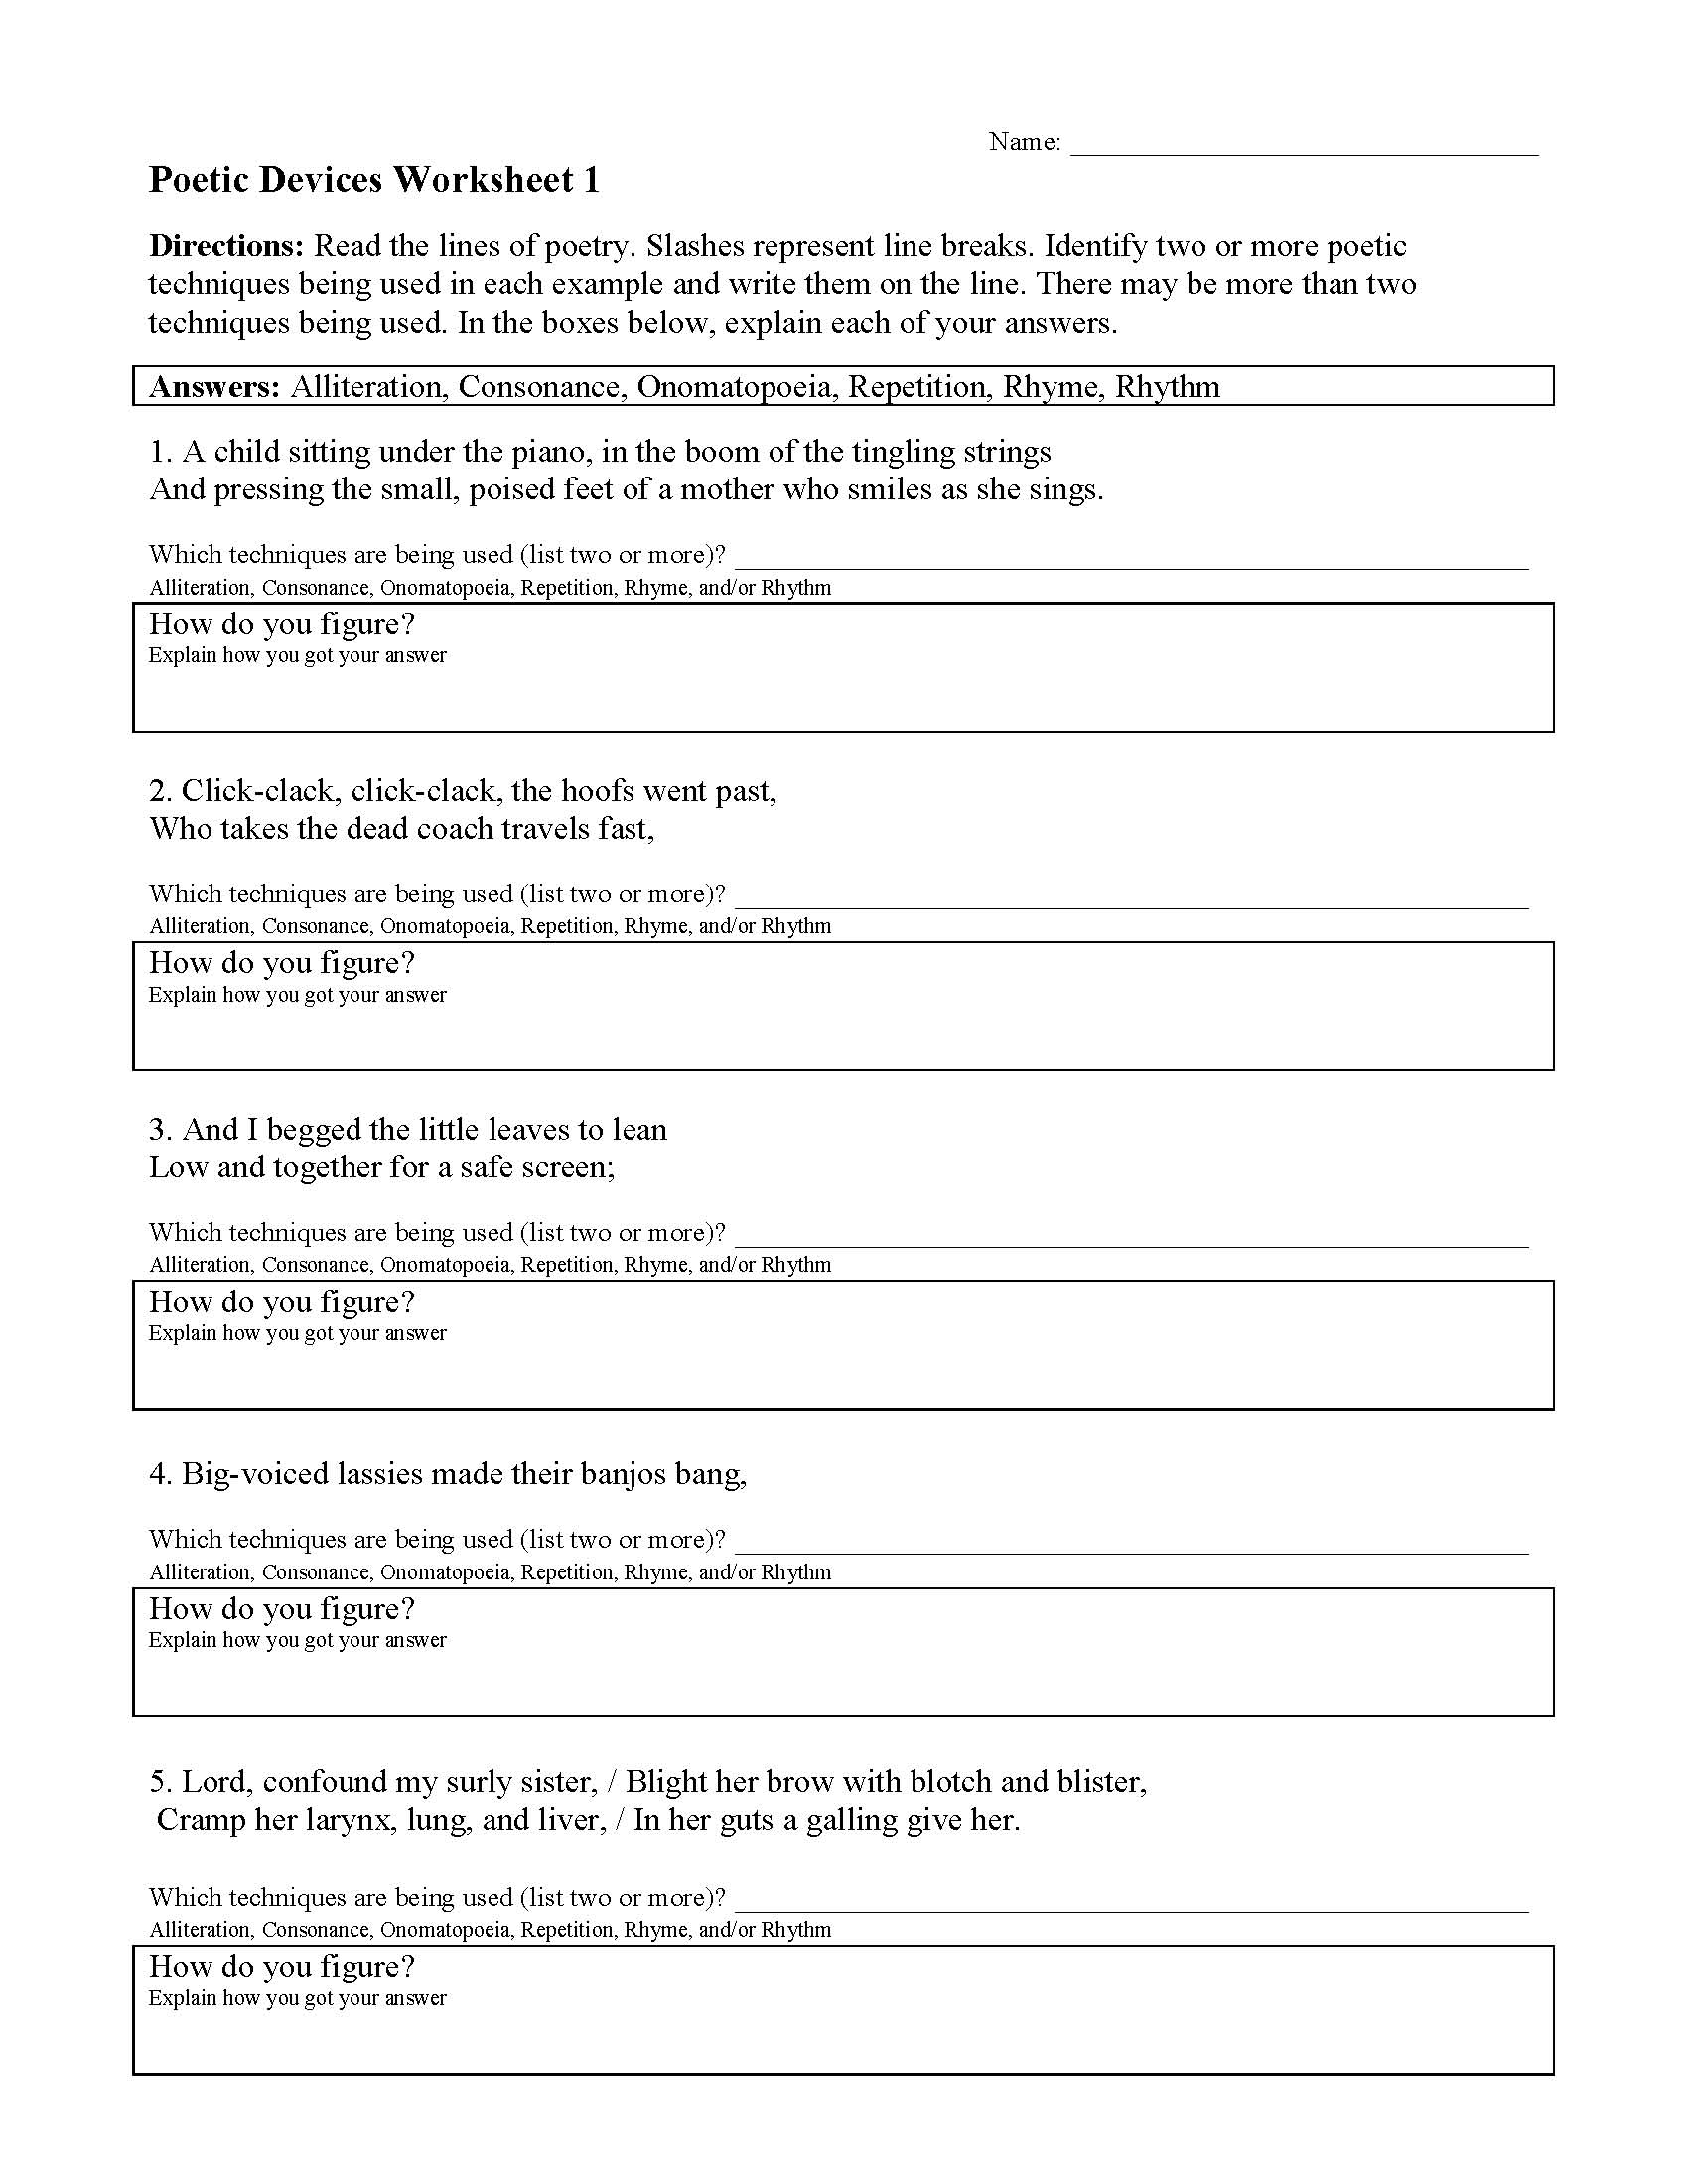 Poetic Devices Worksheet 11  Reading Activity Regarding Poetic Devices Worksheet 1